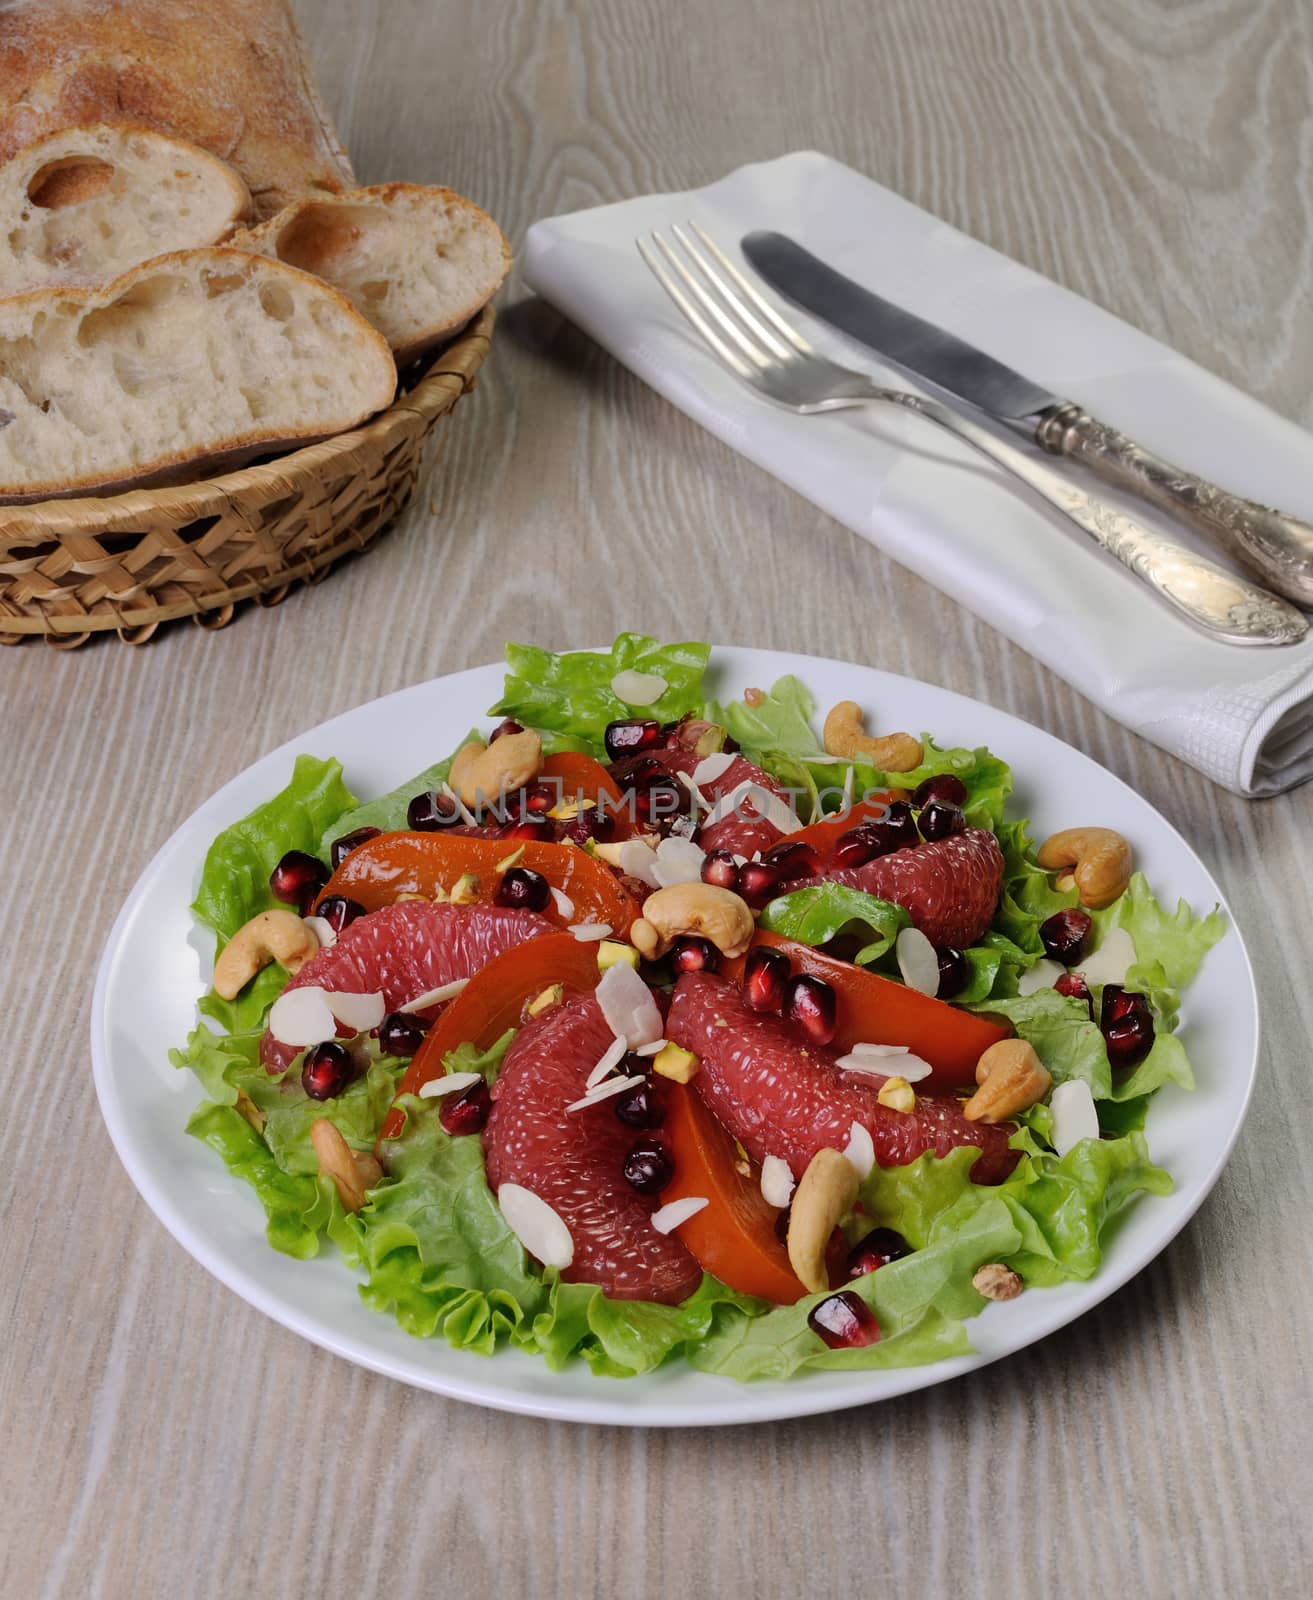 Salad of lettuce with fruits and nuts by Apolonia